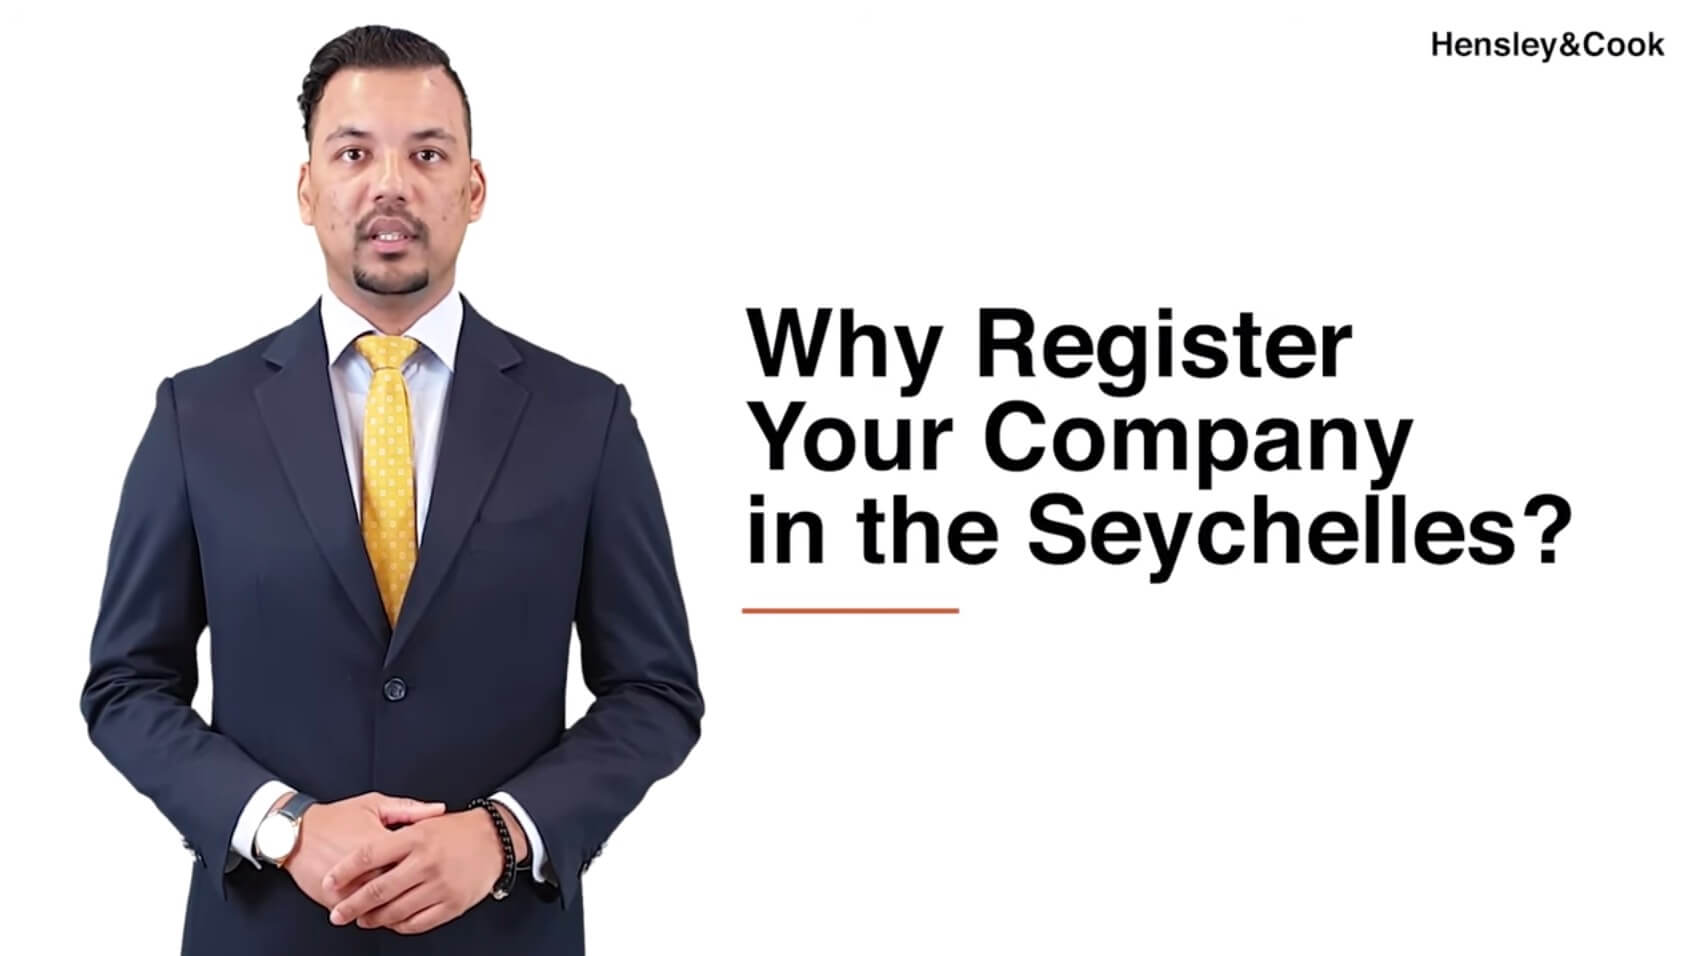 Why-register-your-company-in-the-seychelles